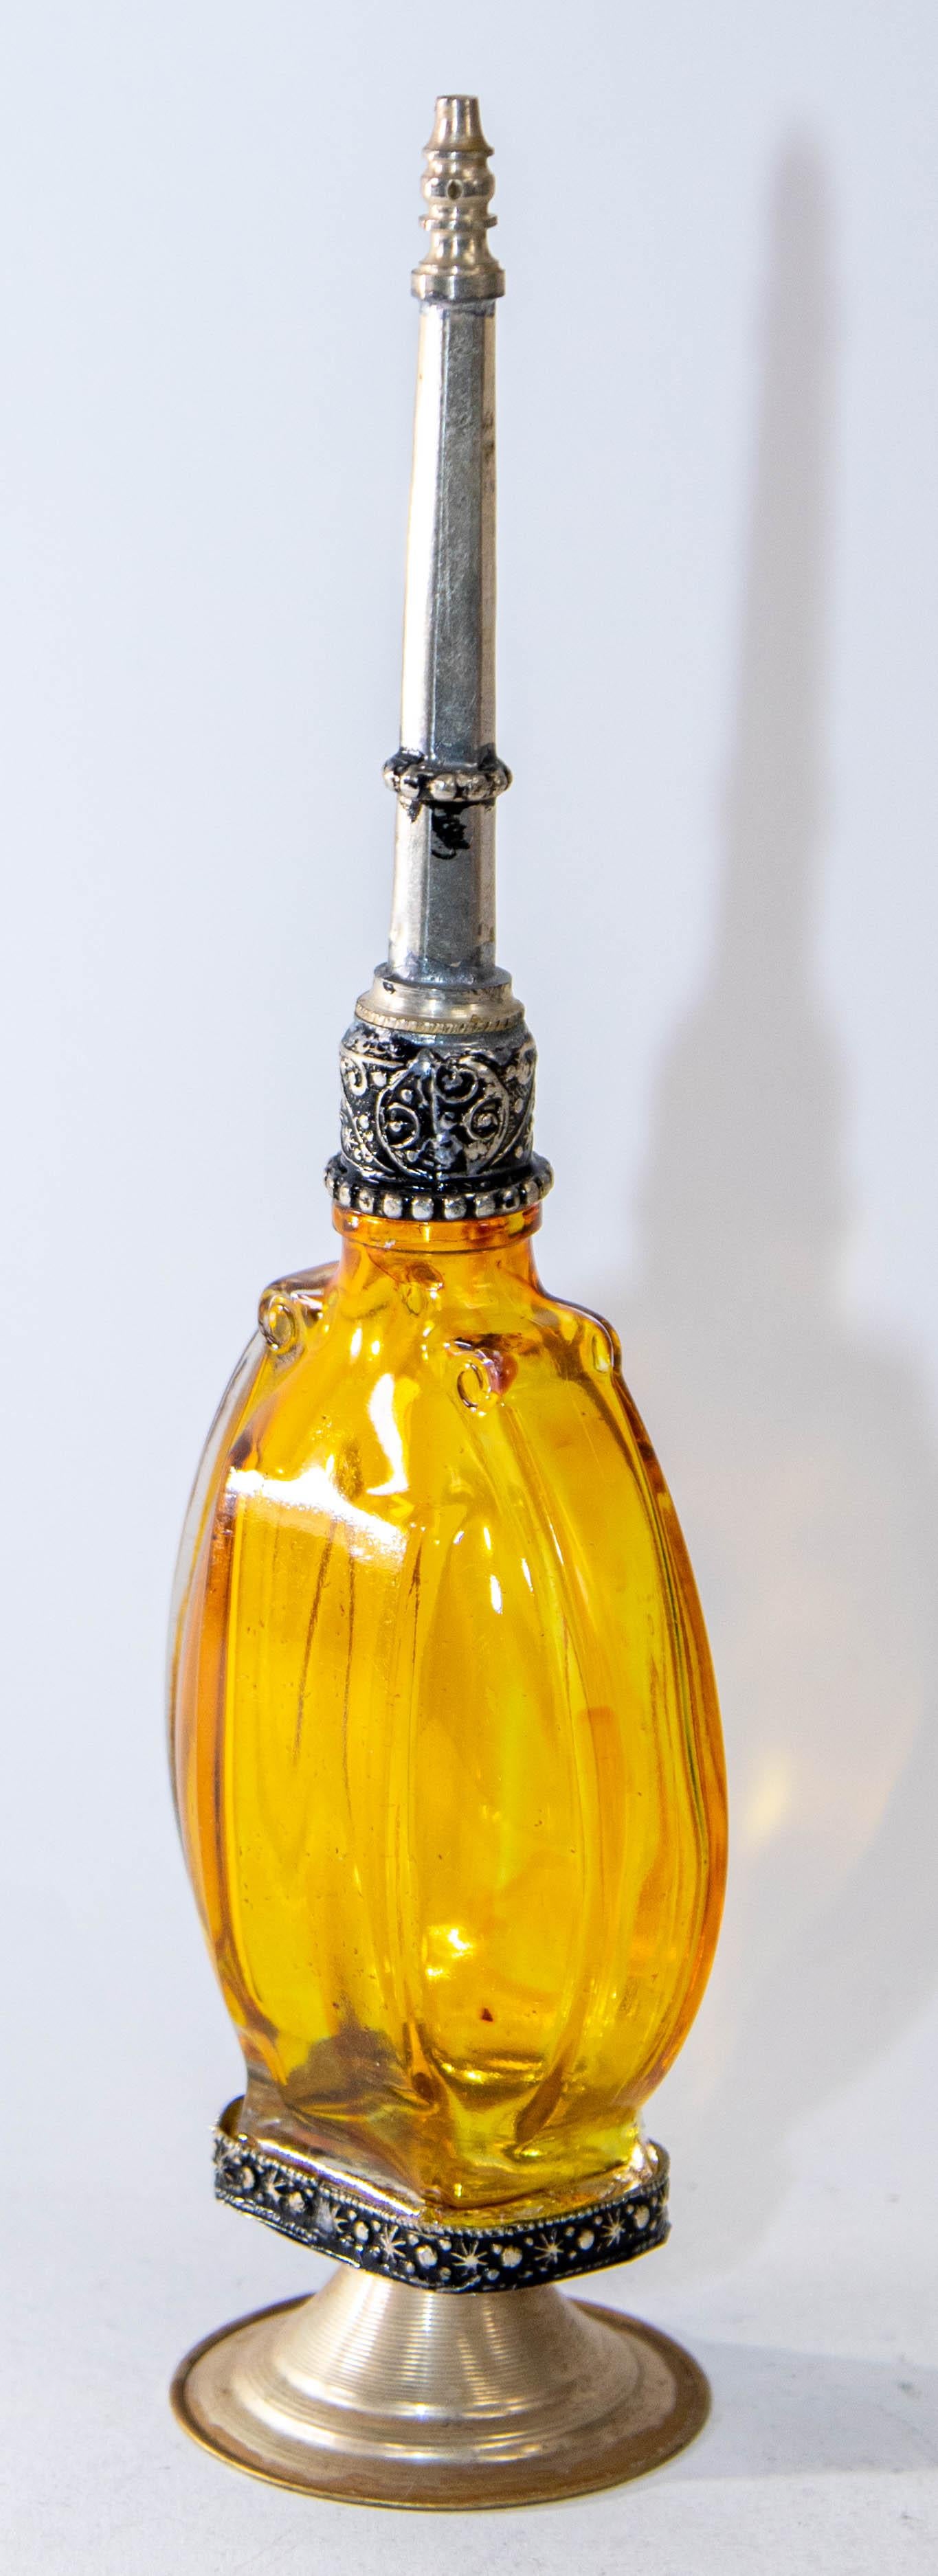 Handcrafted Moroccan Moorish footed glass perfume bottle or rose water sprinkler with raised embossed silvered metal floral design over amber yellow painted glass.
The pressed glass bottle in Art Deco, Art Nouveau style is oval shape with curved